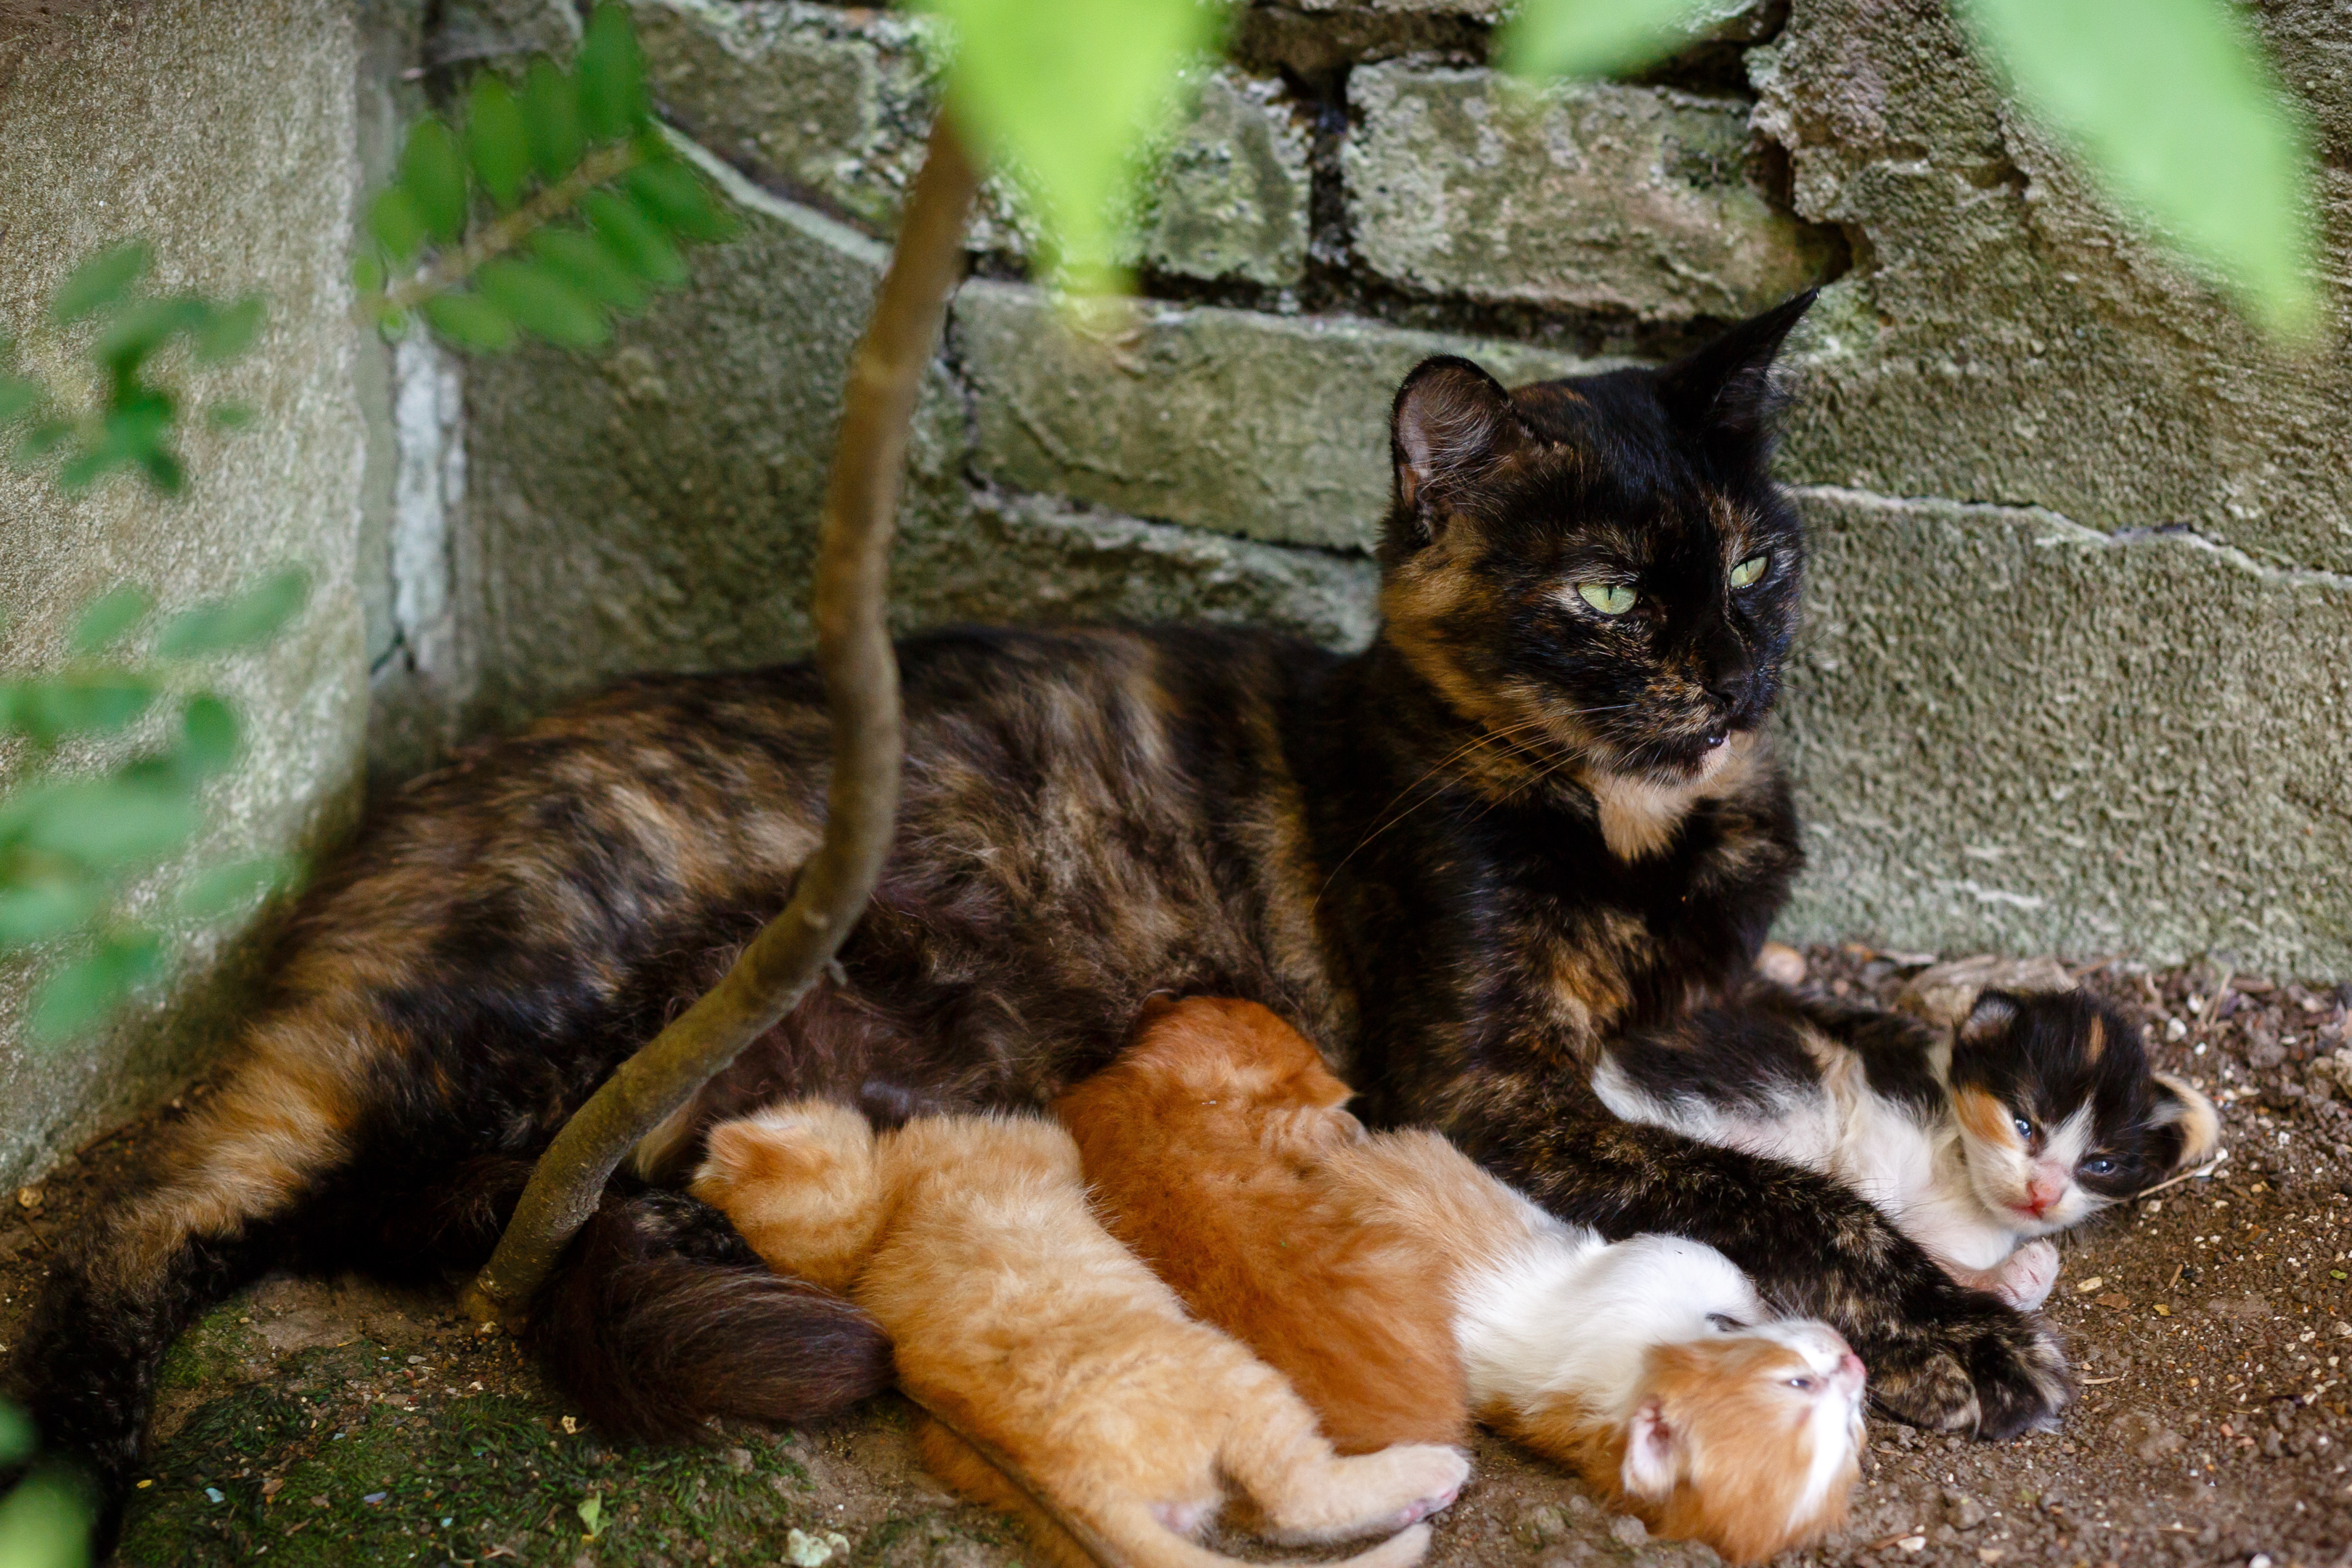 Cats kneading their mother to get milk